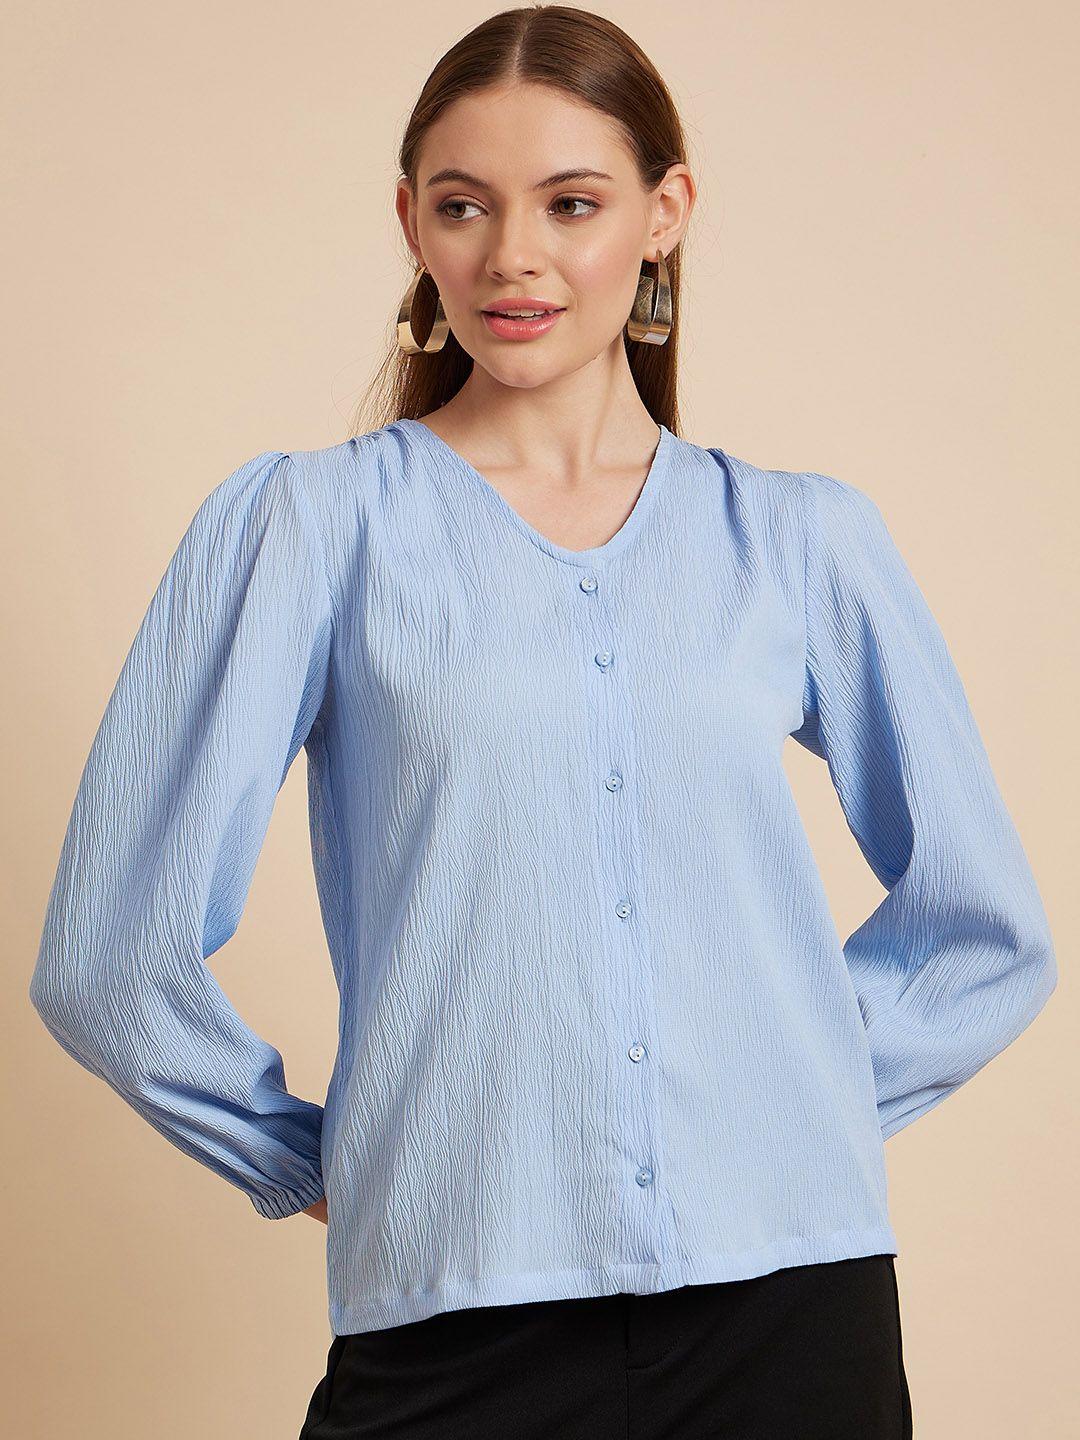 mint street v-neck puff sleeves crepe shirt style top